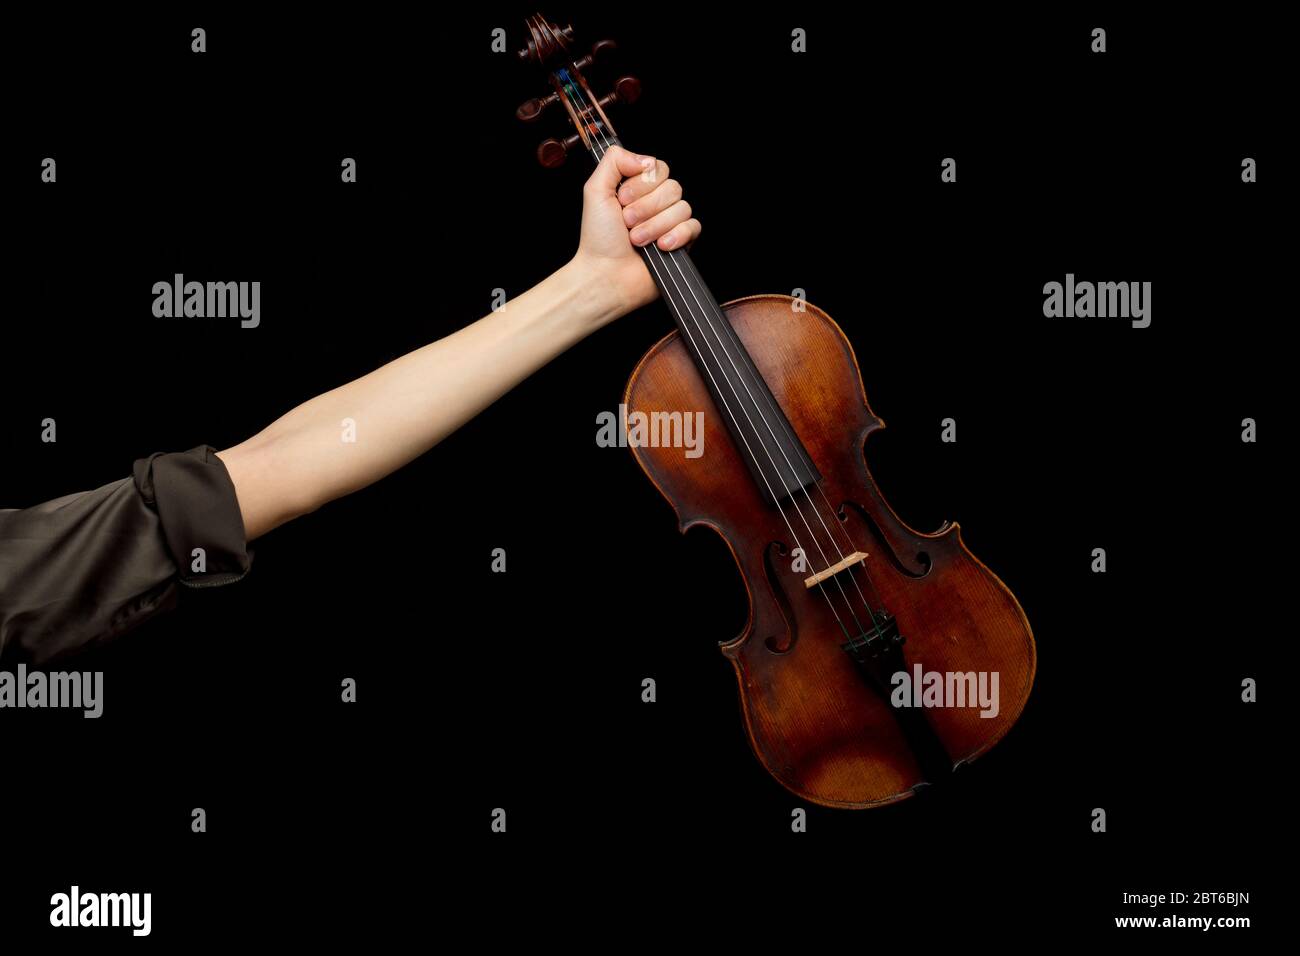 Woman displaying a classical baroque violin in her outstretched hand over a dark background with copy space set up in the original historic style Stock Photo